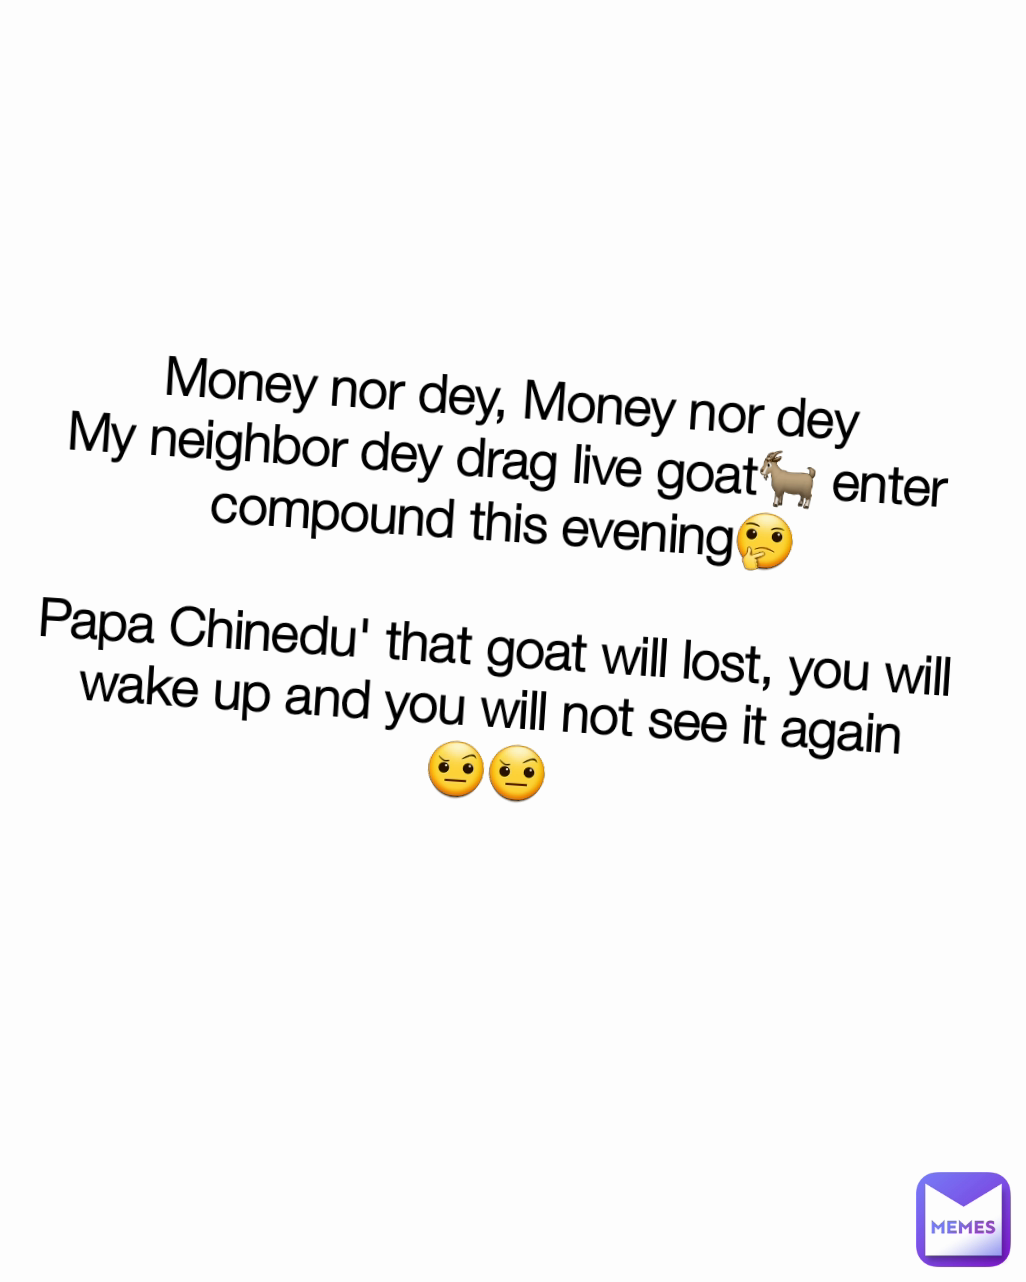 Money nor dey, Money nor dey
My neighbor dey drag live goat🐐 enter compound this evening🤔

Papa Chinedu' that goat will lost, you will wake up and you will not see it again
🤨🤨